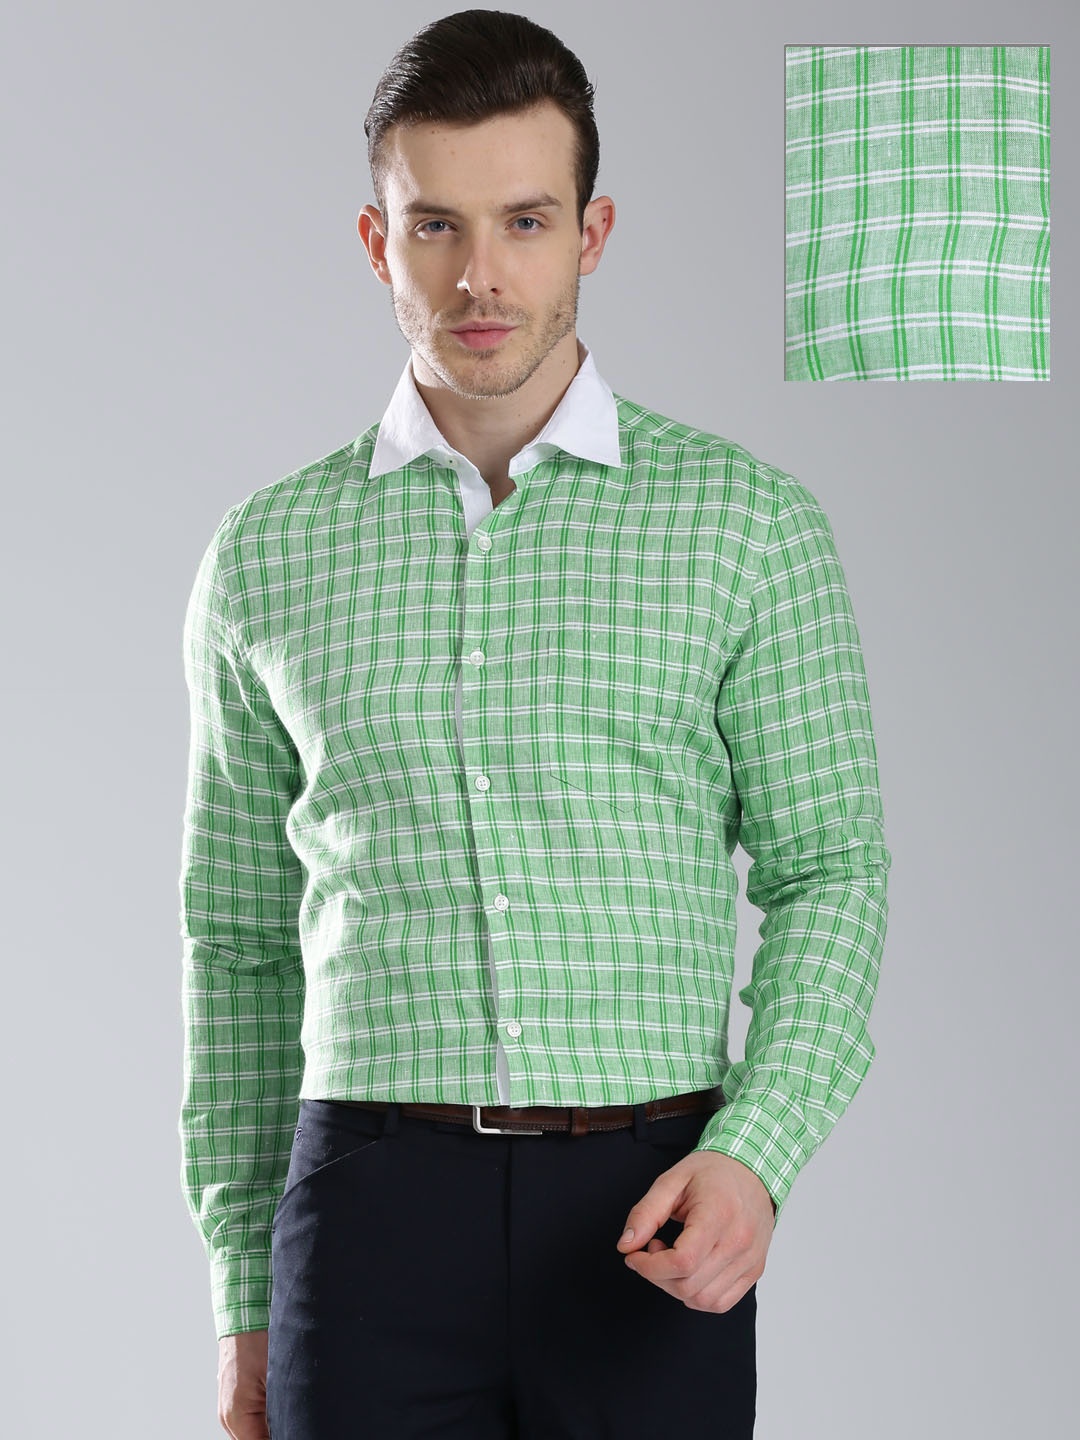 Top 15 Different Types of Green Shirts For Men and Women